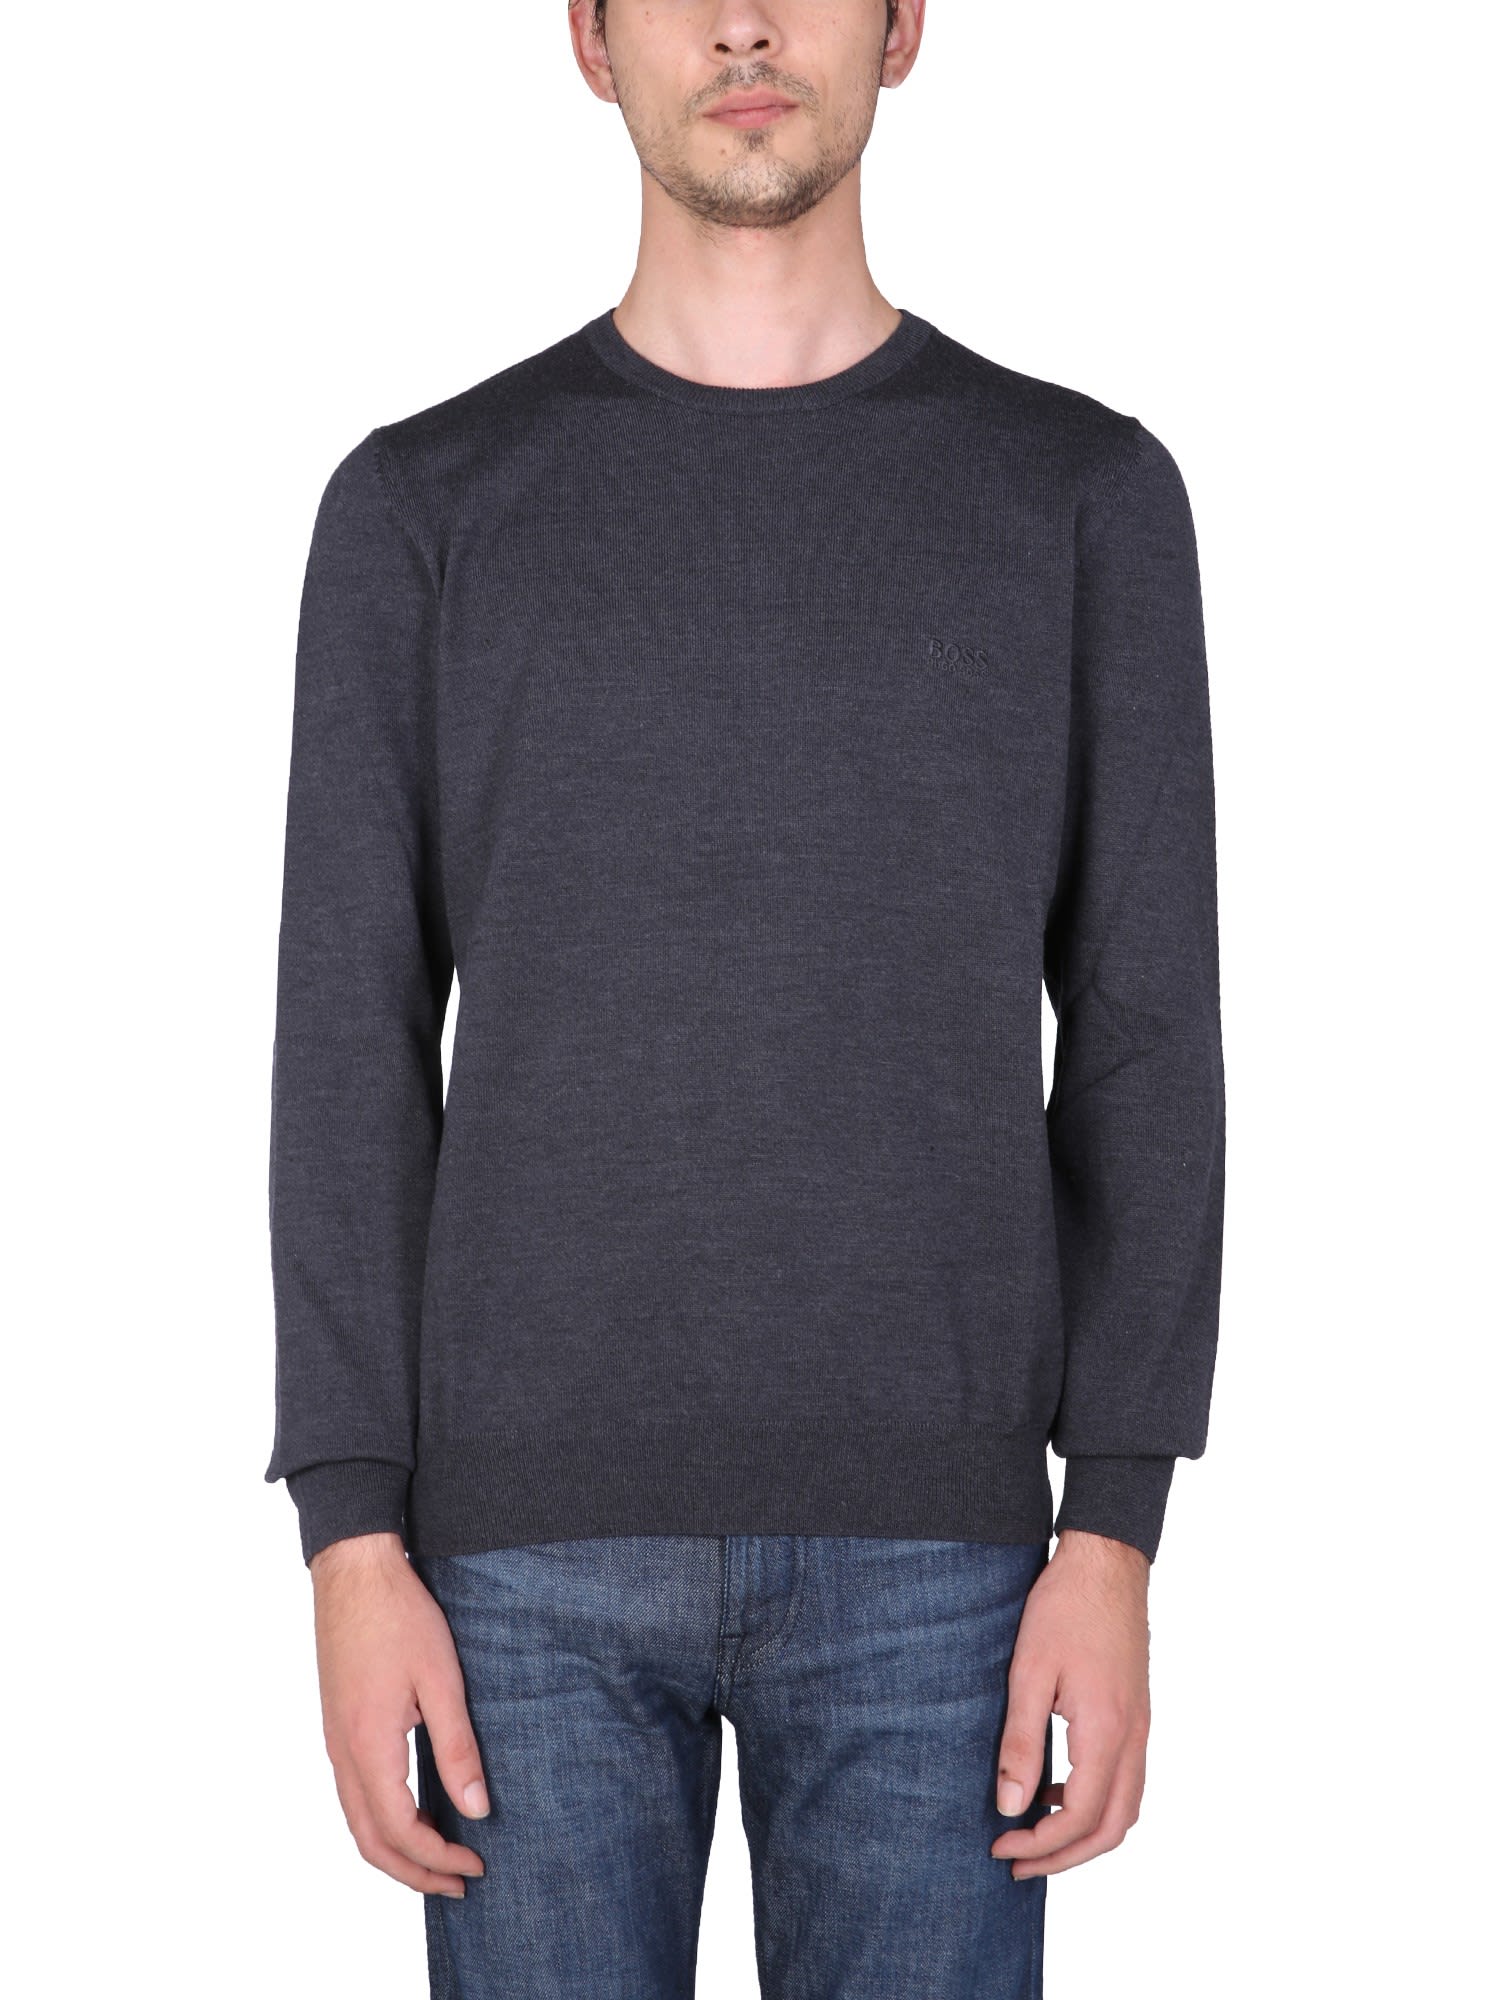 Hugo Boss Sweater With Embroidered Logo